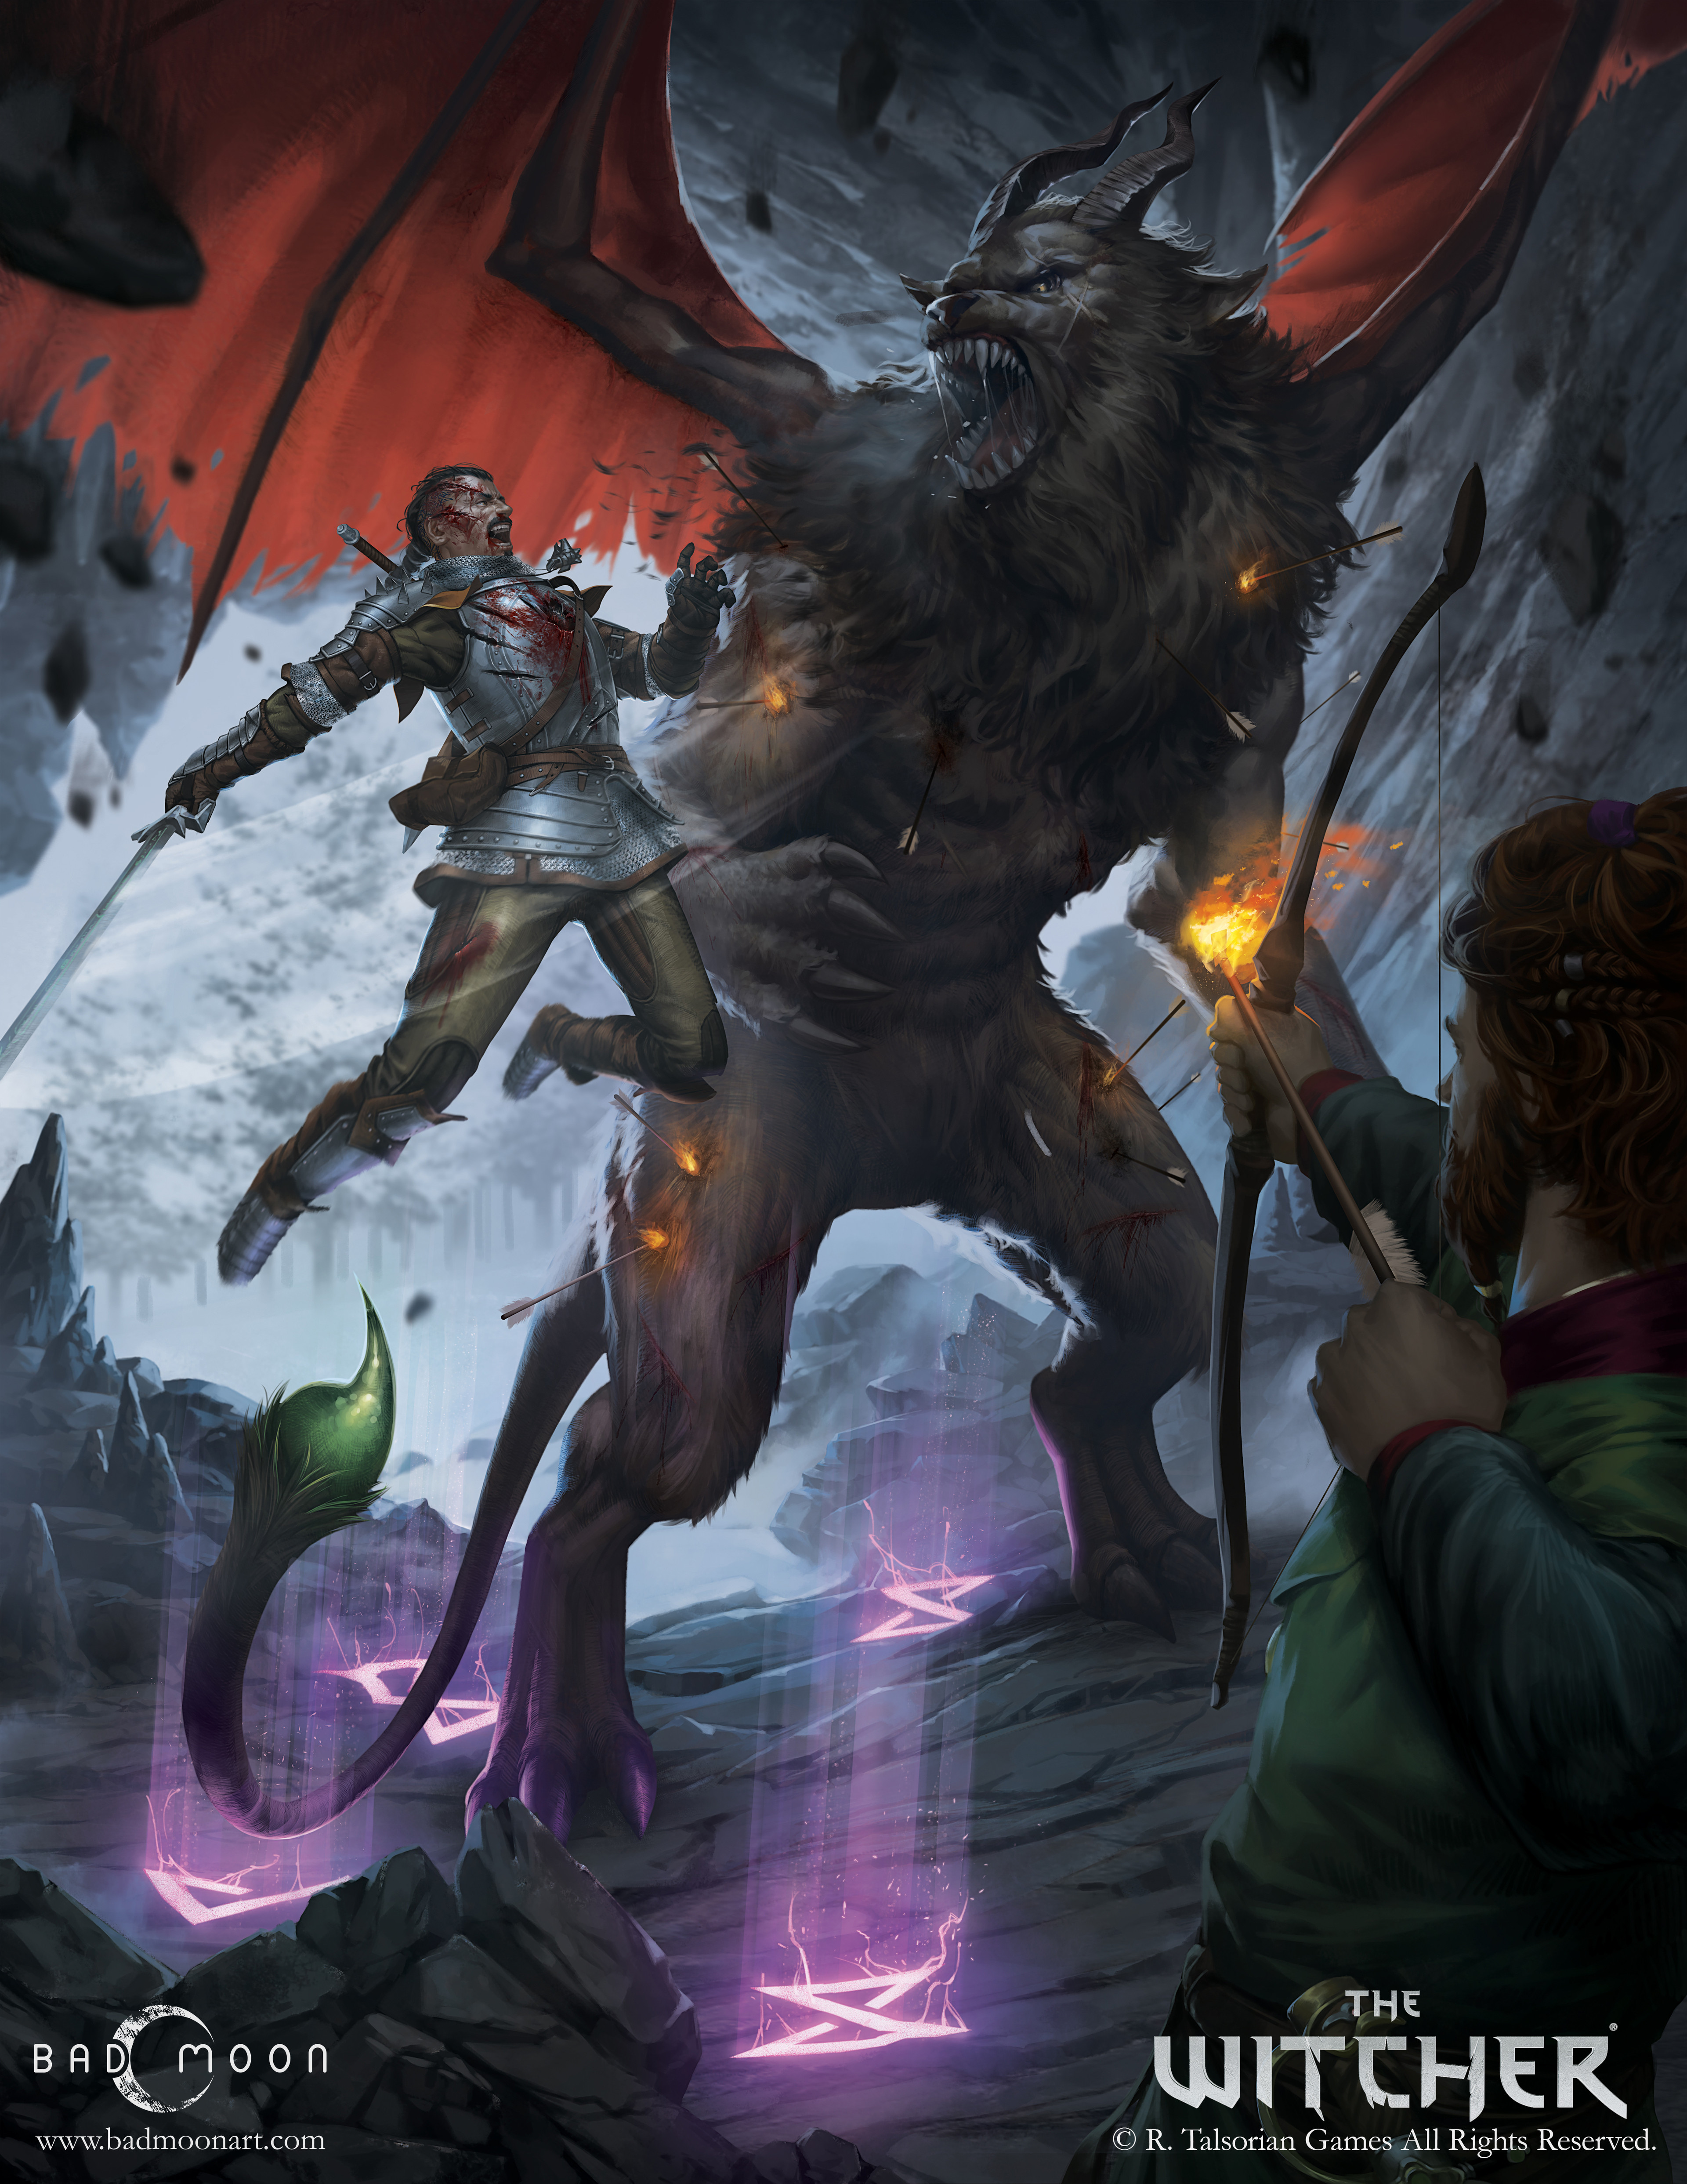 Erland of Larvik Fighting a Manticore that nearly took his life as Vaz of Ban Ard assists the Witcher.